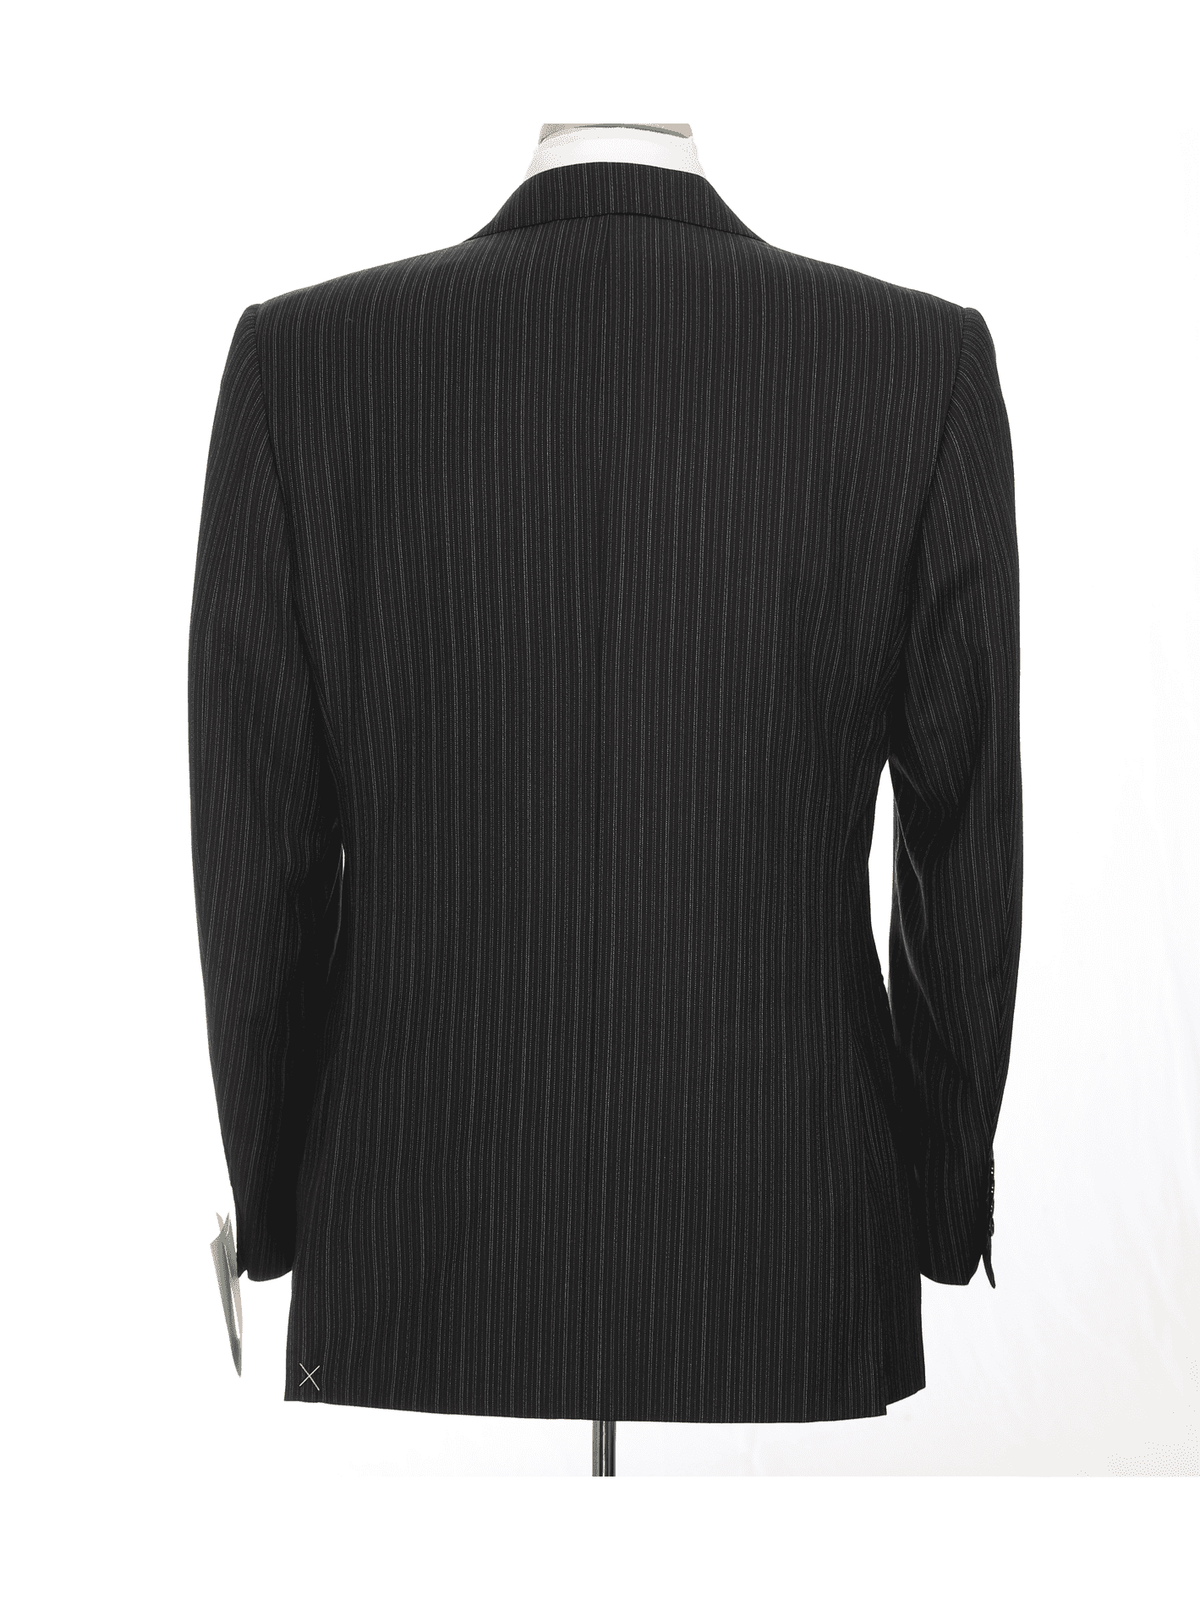 Canali SUITS Canali 38r 46 Drop 6 Classic Fit Black Striped 3-button Pleated 100% Wool Suit